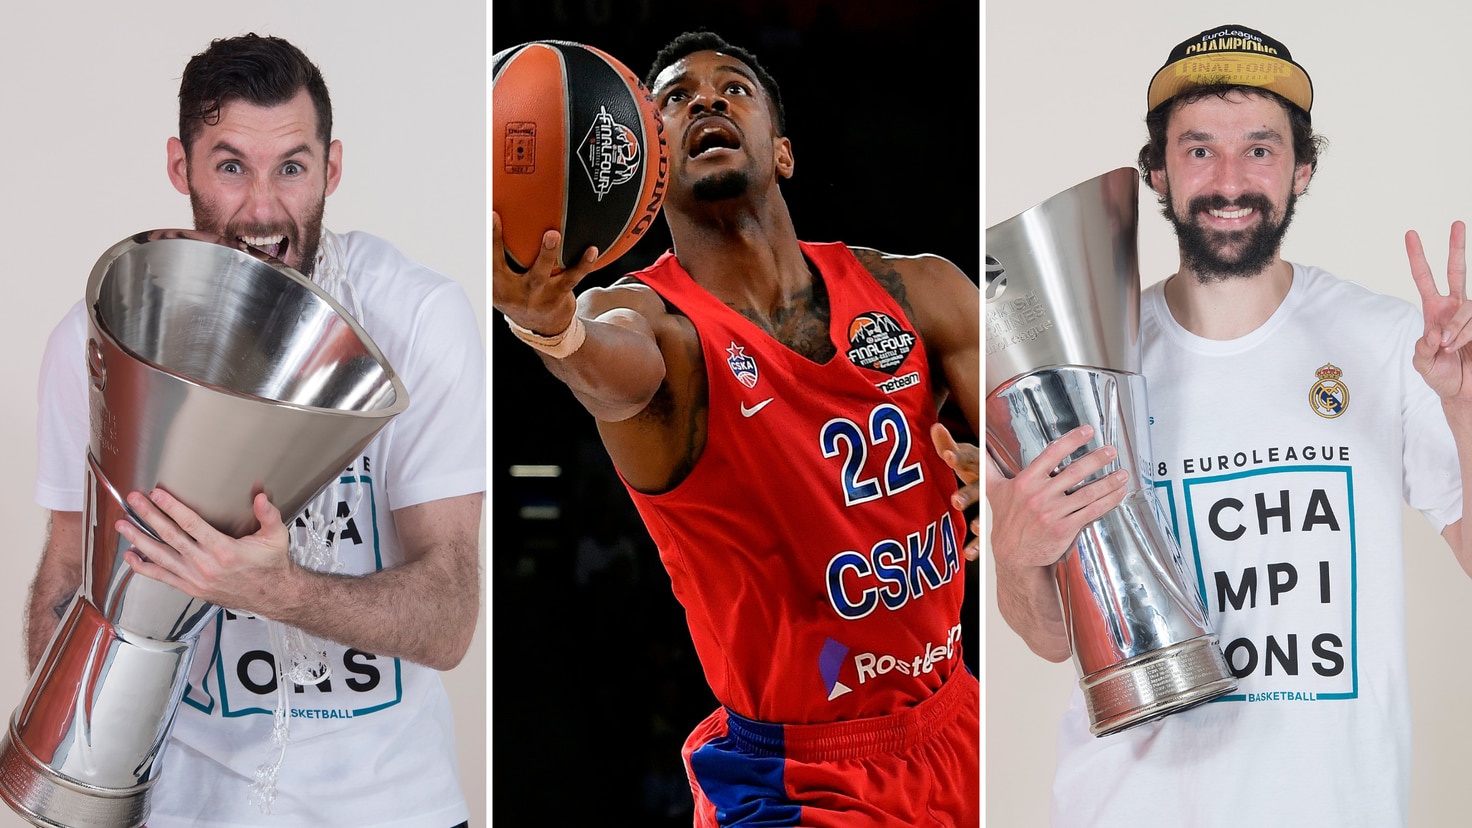 Which Barcelona and Real Madrid players have managed to win the Euroleague?
